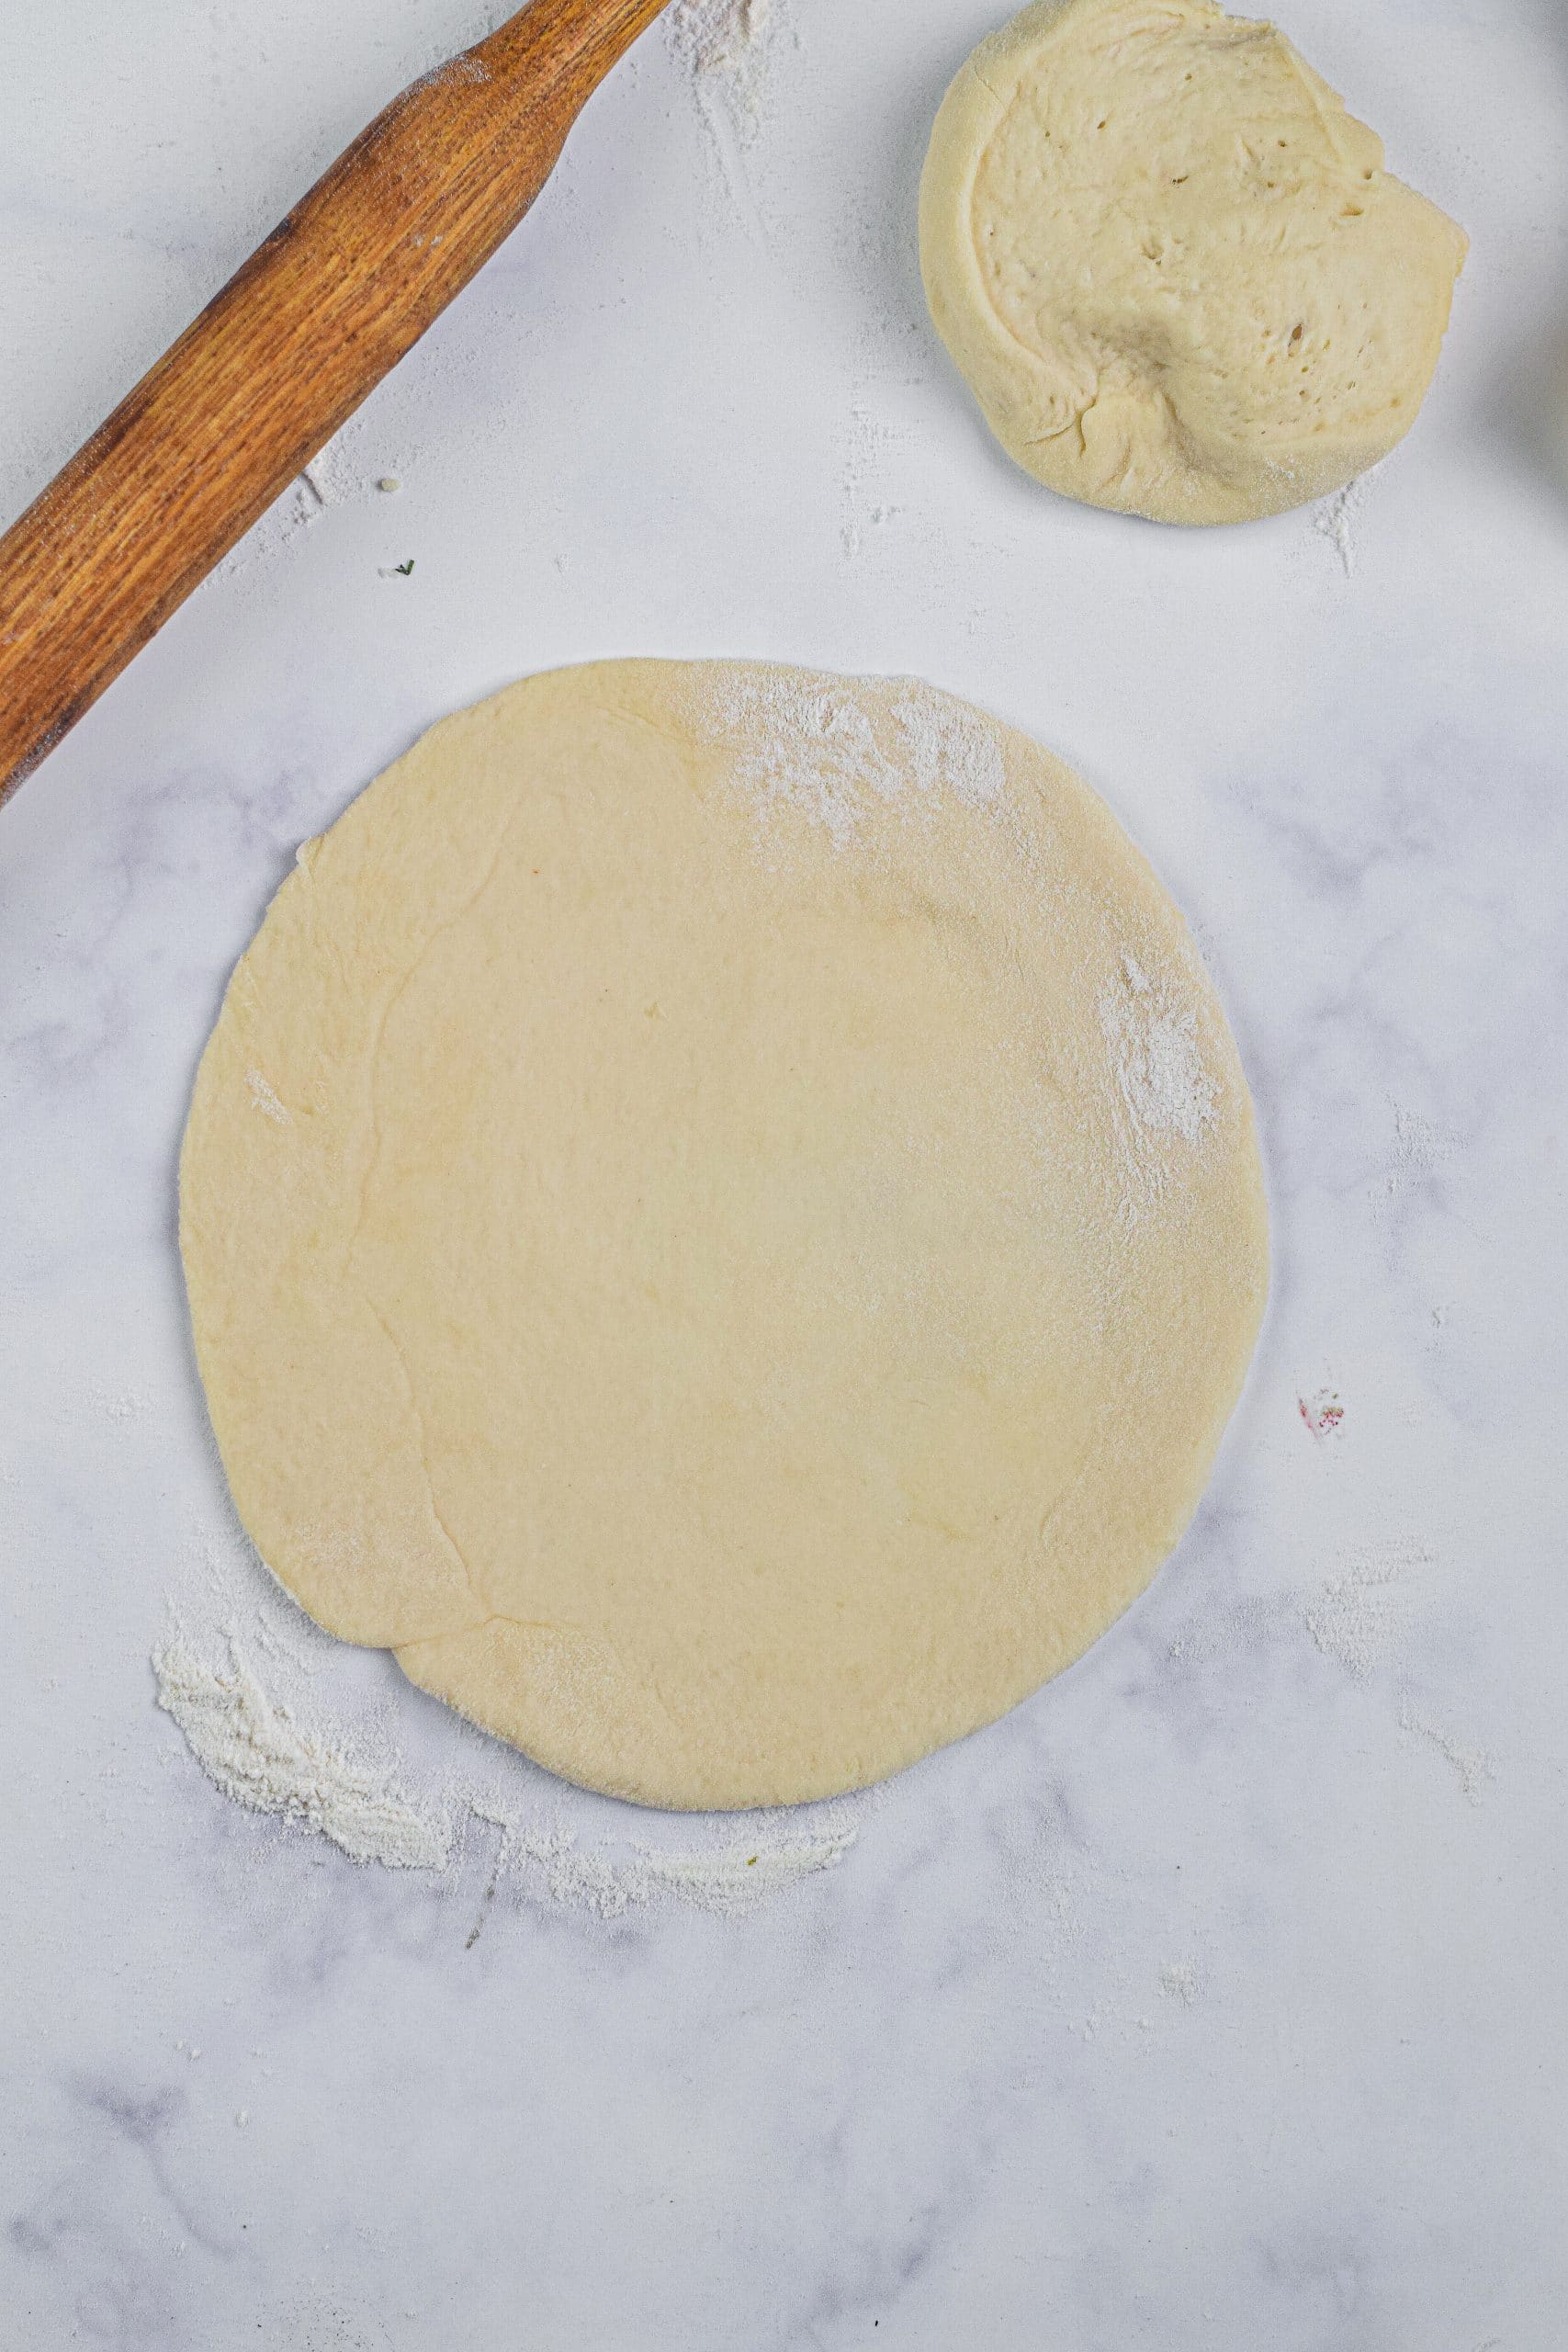 rolled out flattened circles of dough on a floured surface